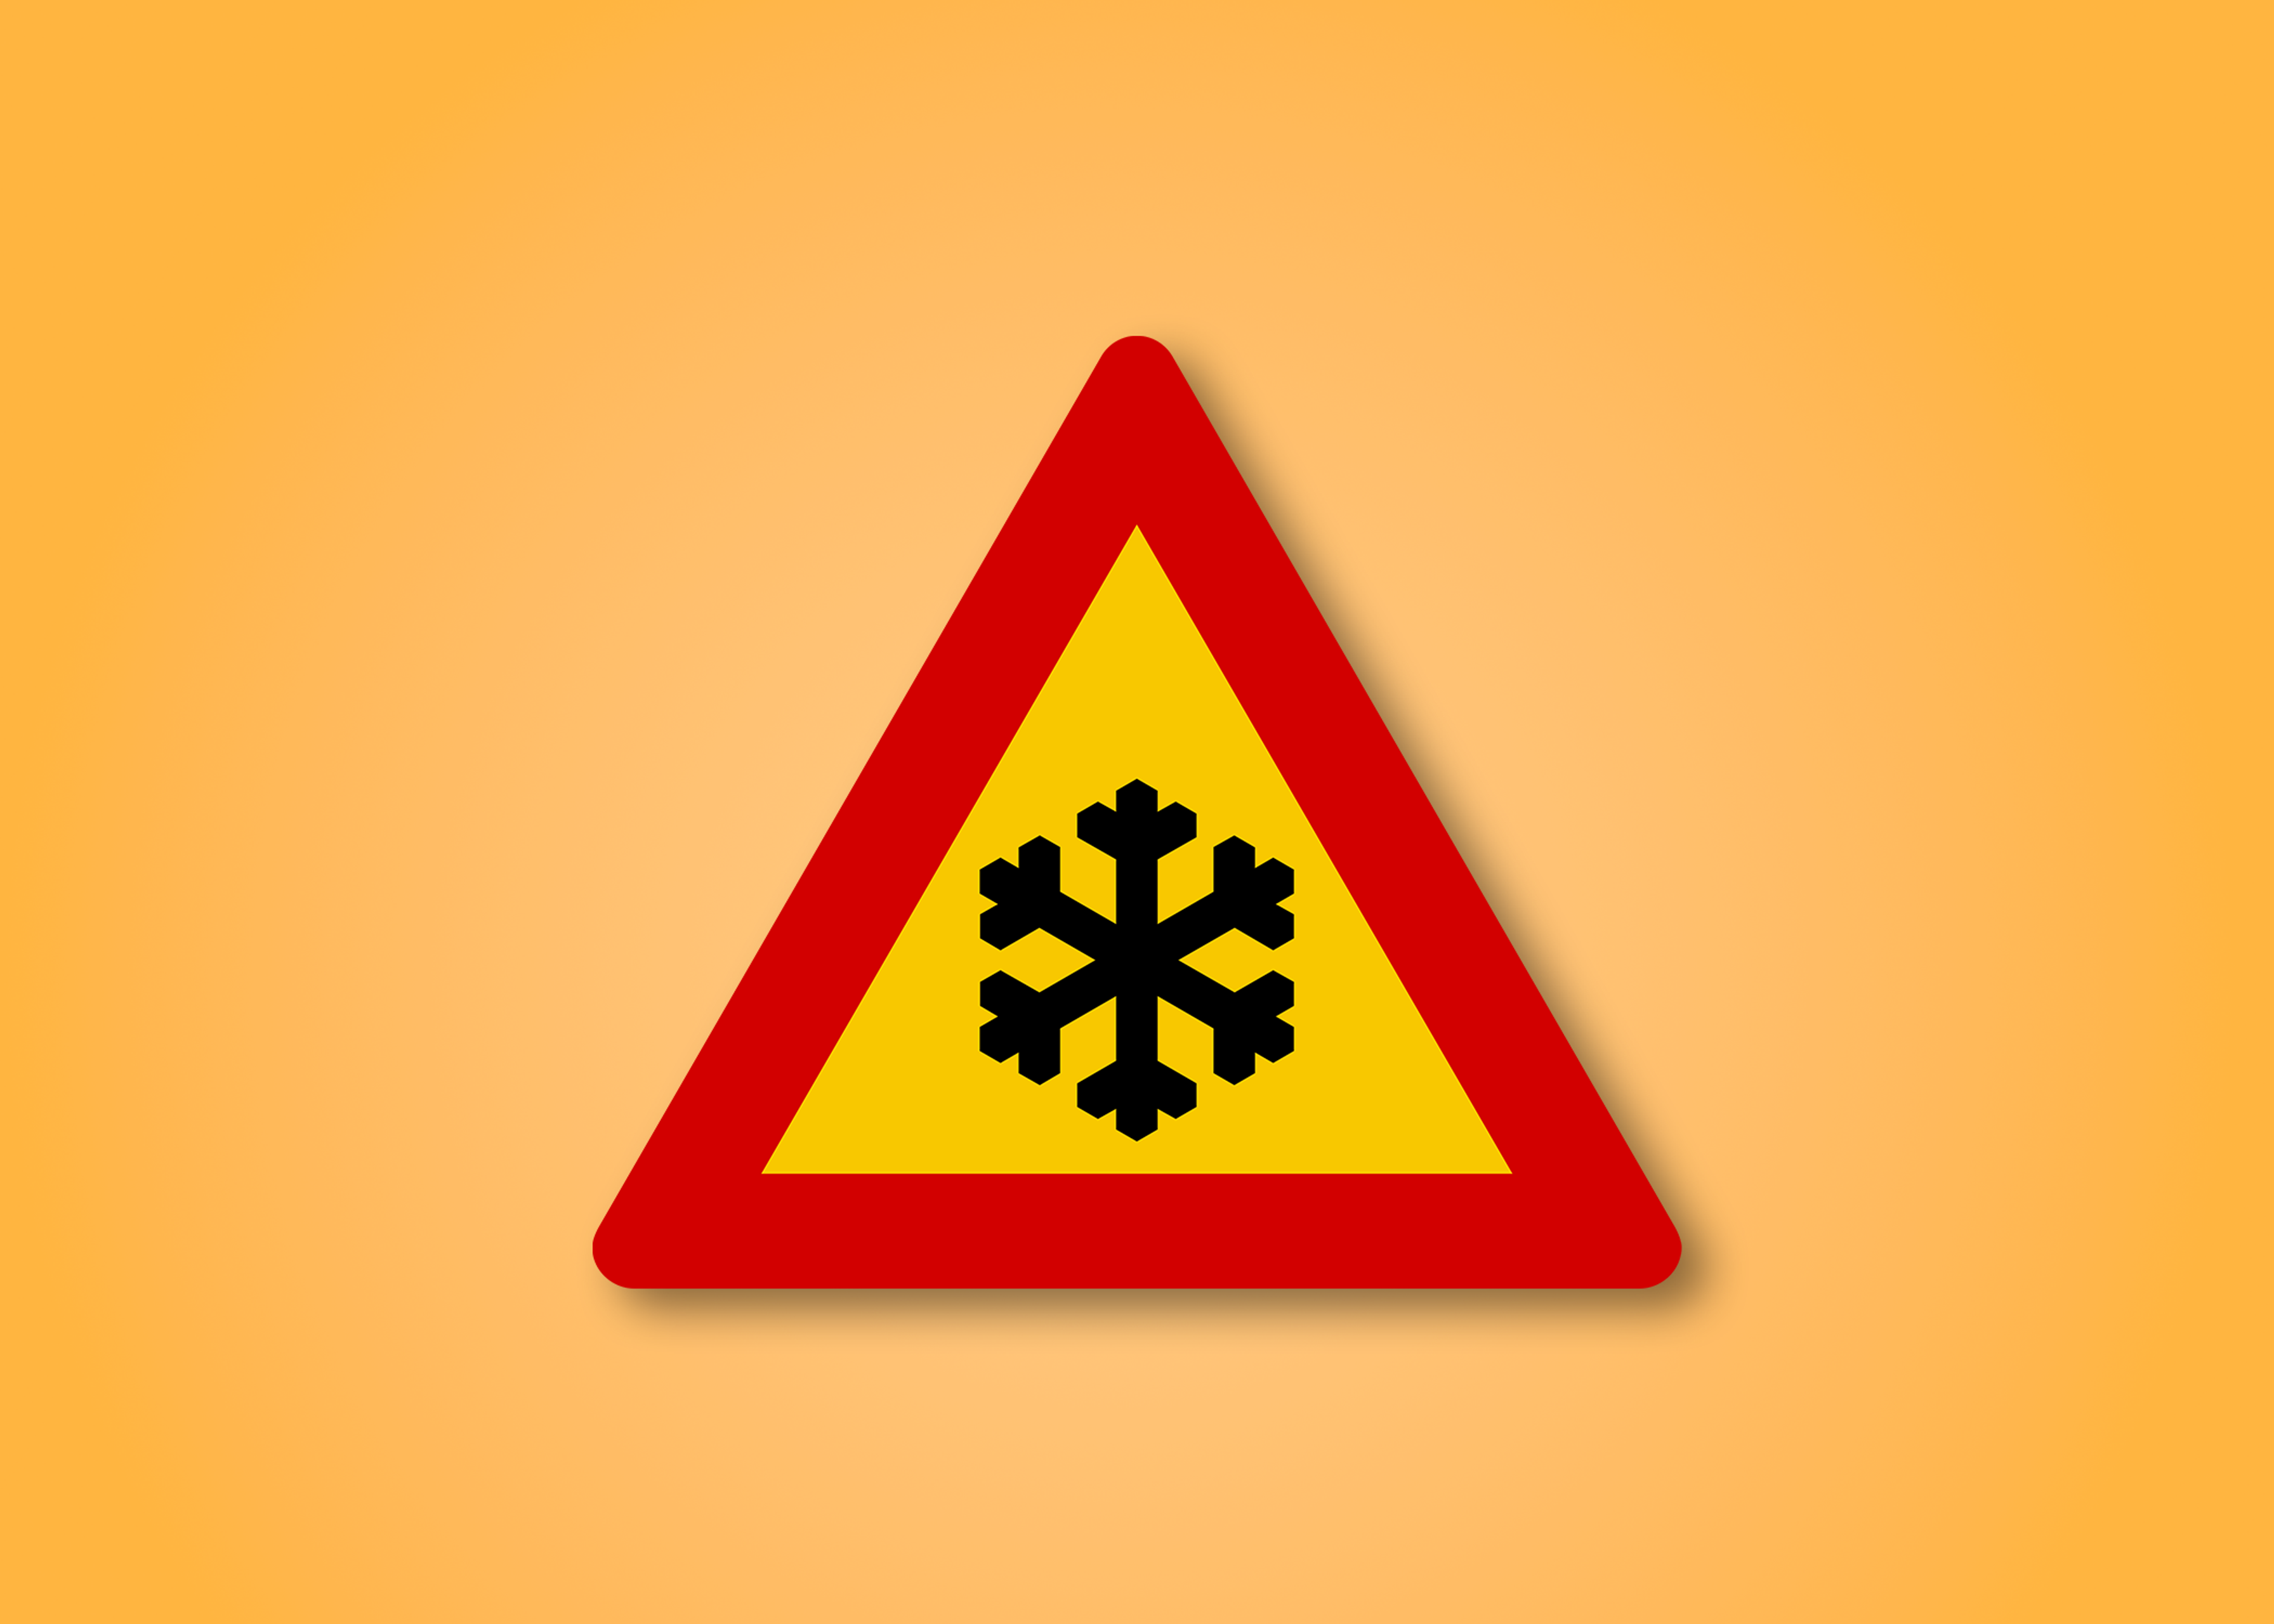 Red and yellow triangle road sign with a snow flake in the middle. This road sign means icy road.